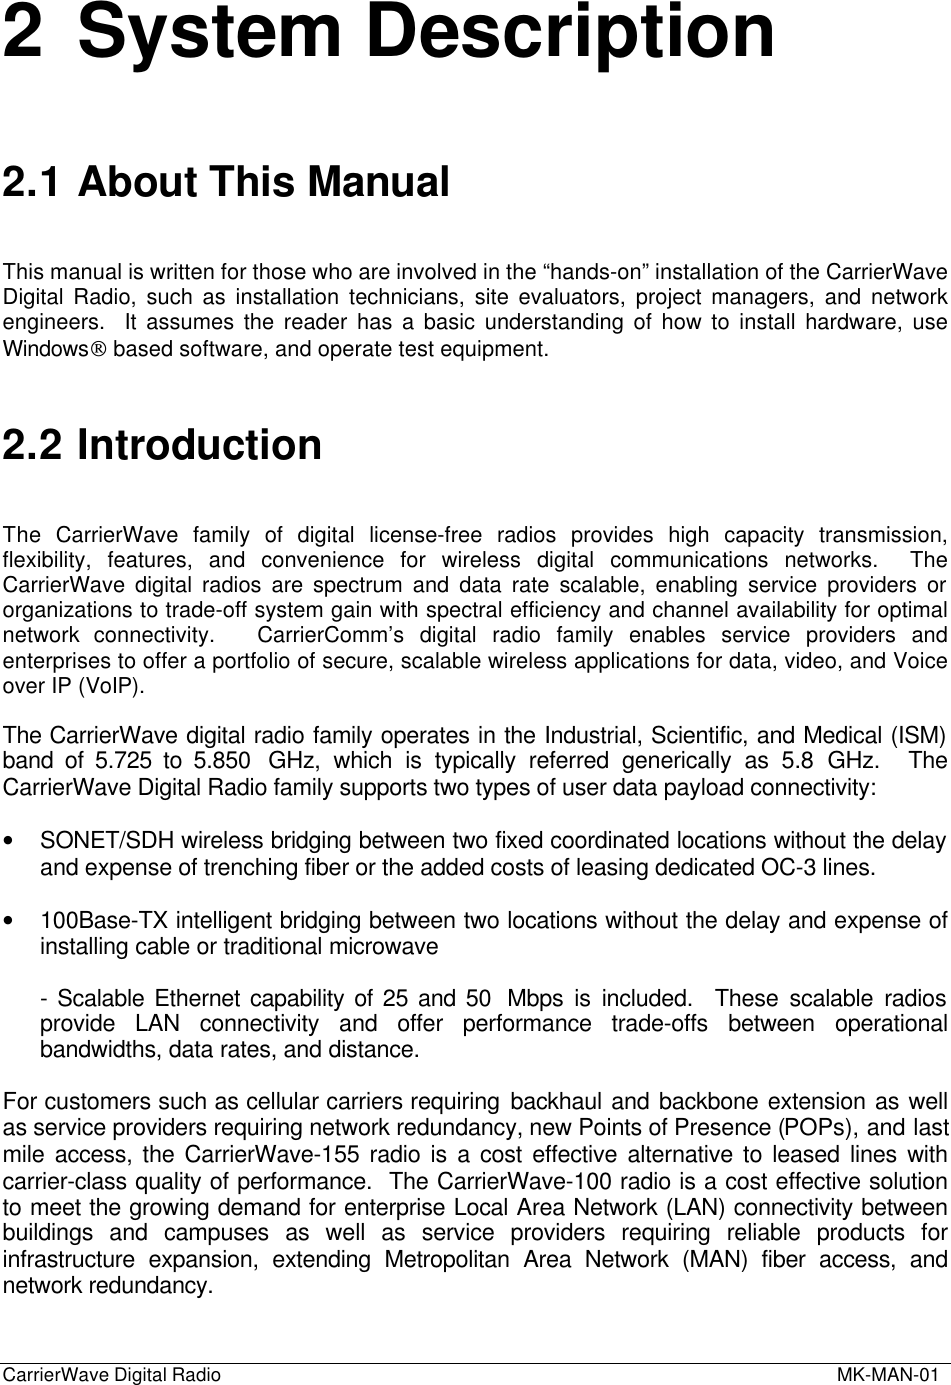 CarrierWave Digital Radio  MK-MAN-012 System Description2.1 About This ManualThis manual is written for those who are involved in the “hands-on” installation of the CarrierWaveDigital Radio, such as installation technicians, site evaluators, project managers, and networkengineers.  It assumes the reader has a basic understanding of how to install hardware, useWindows based software, and operate test equipment.2.2 IntroductionThe  CarrierWave family of digital license-free radios provides high capacity transmission,flexibility, features, and convenience for wireless digital communications networks.  TheCarrierWave digital radios are spectrum and data rate scalable, enabling service providers ororganizations to trade-off system gain with spectral efficiency and channel availability for optimalnetwork connectivity.   CarrierComm’s digital radio family enables service providers andenterprises to offer a portfolio of secure, scalable wireless applications for data, video, and Voiceover IP (VoIP).The CarrierWave digital radio family operates in the Industrial, Scientific, and Medical (ISM)band of 5.725 to 5.850  GHz, which is typically referred generically as 5.8 GHz.  TheCarrierWave Digital Radio family supports two types of user data payload connectivity:• SONET/SDH wireless bridging between two fixed coordinated locations without the delayand expense of trenching fiber or the added costs of leasing dedicated OC-3 lines.• 100Base-TX intelligent bridging between two locations without the delay and expense ofinstalling cable or traditional microwave- Scalable Ethernet capability of 25 and 50  Mbps is included.  These scalable radiosprovide LAN connectivity and offer performance trade-offs between operationalbandwidths, data rates, and distance.For customers such as cellular carriers requiring backhaul and backbone extension as wellas service providers requiring network redundancy, new Points of Presence (POPs), and lastmile access, the CarrierWave-155 radio is a cost effective alternative to leased lines withcarrier-class quality of performance.  The CarrierWave-100 radio is a cost effective solutionto meet the growing demand for enterprise Local Area Network (LAN) connectivity betweenbuildings and campuses as well as service providers requiring reliable products forinfrastructure expansion, extending Metropolitan Area Network (MAN) fiber access, andnetwork redundancy.